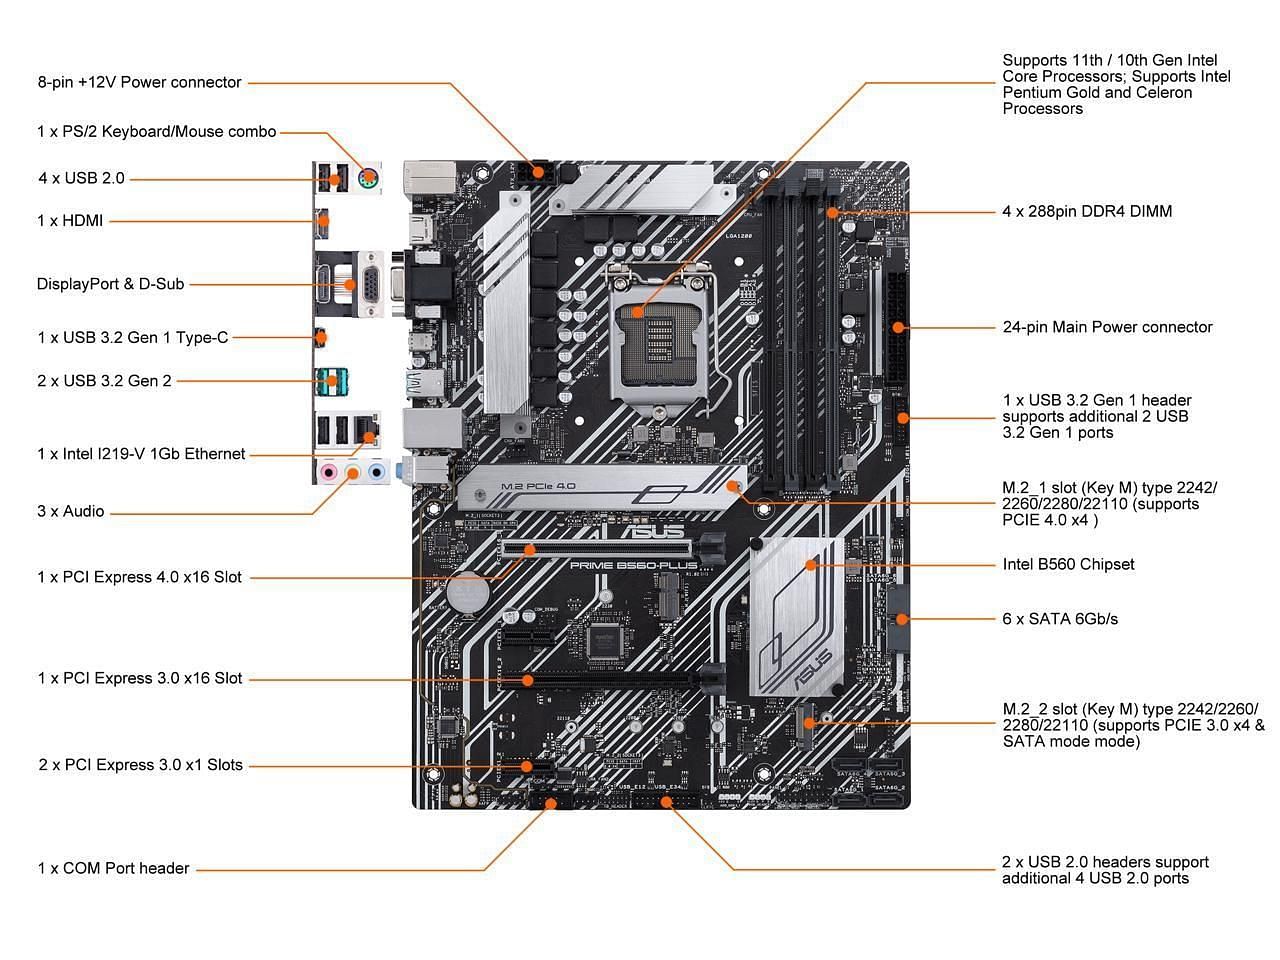 Motherboard connections (Image via Asus)